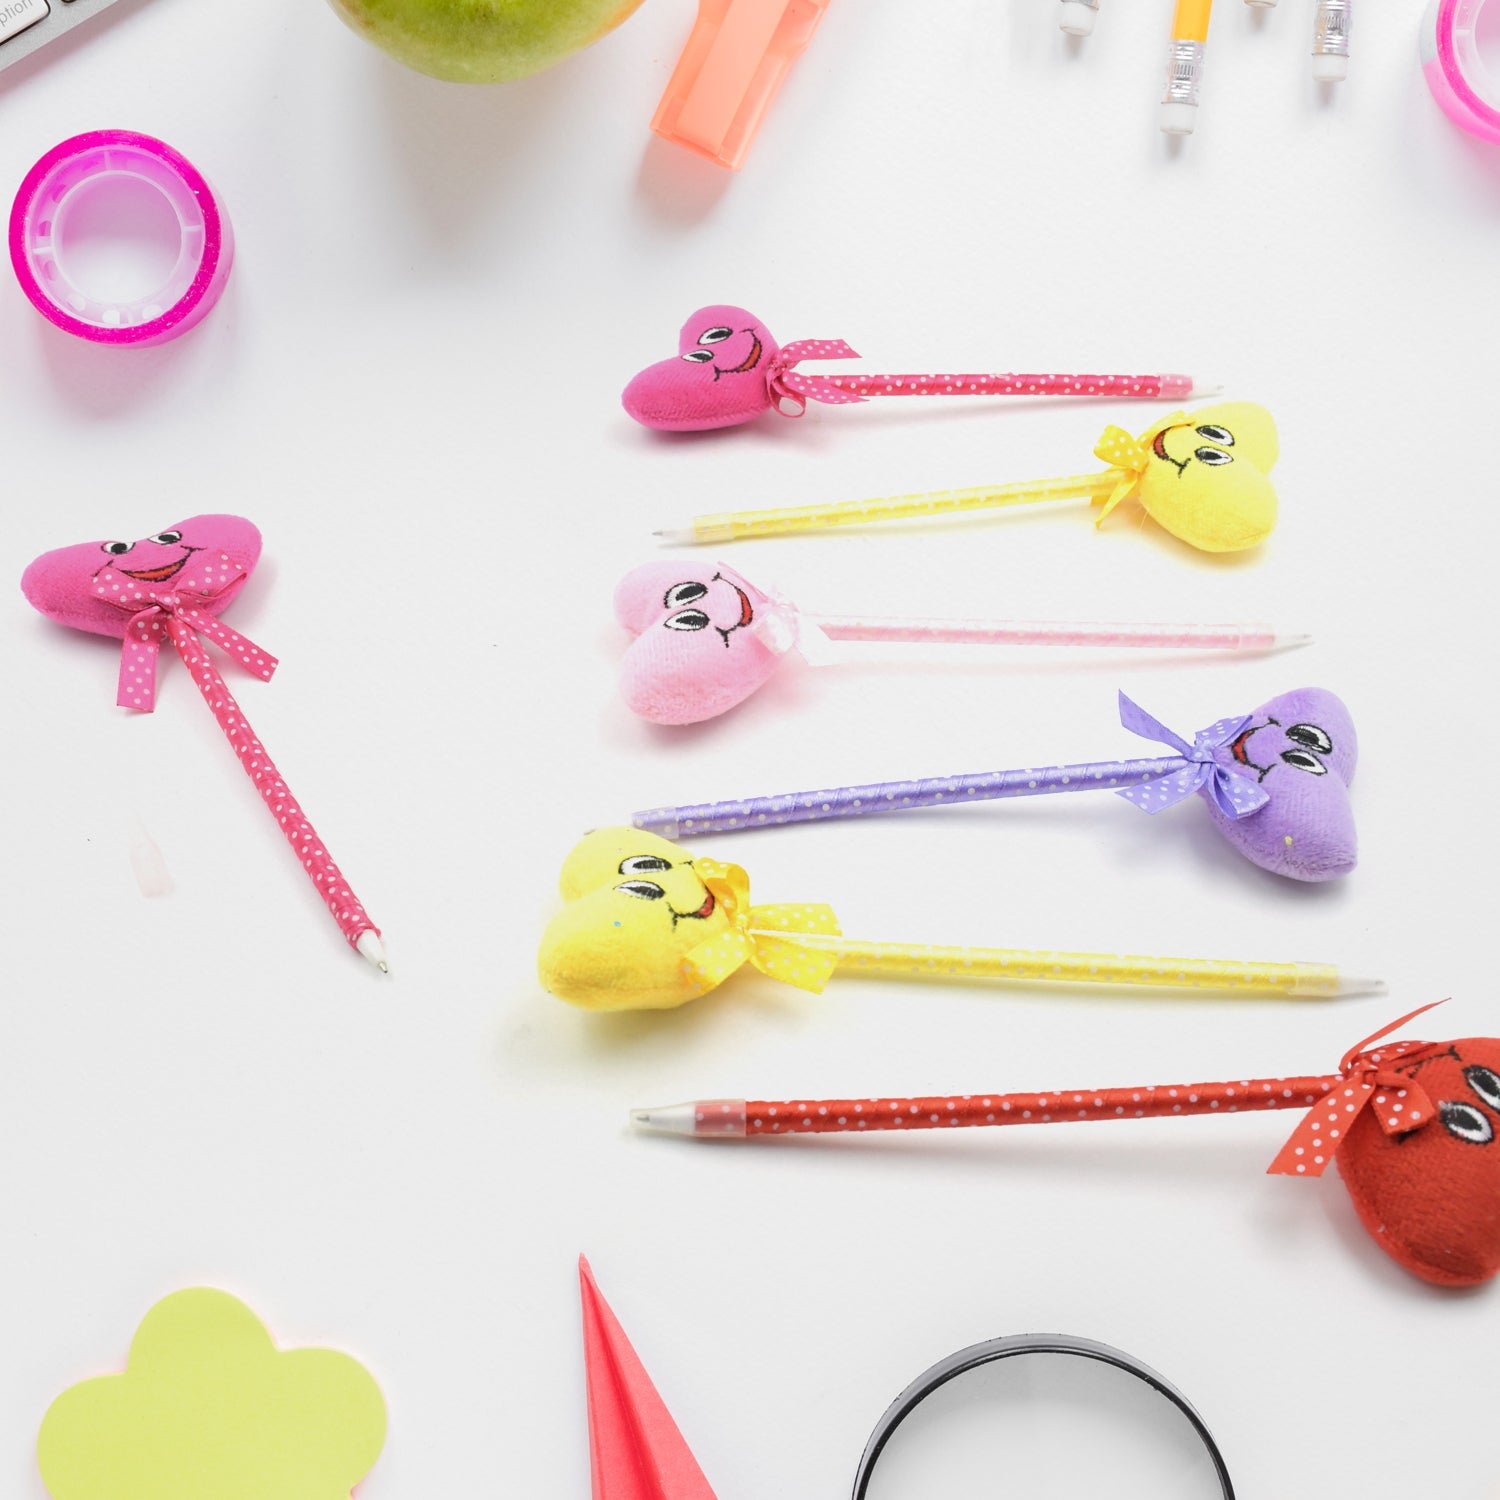 4292 Cute Cartoon Shape & Heart Design Facy Writting Pen Attached Rattle | Ball Pen Smooth Writing For Wedding , Events & Multiuse Pen  Best Pen l Use for Kids (12 Pcs Set Mix Design & Color) - deal99.in